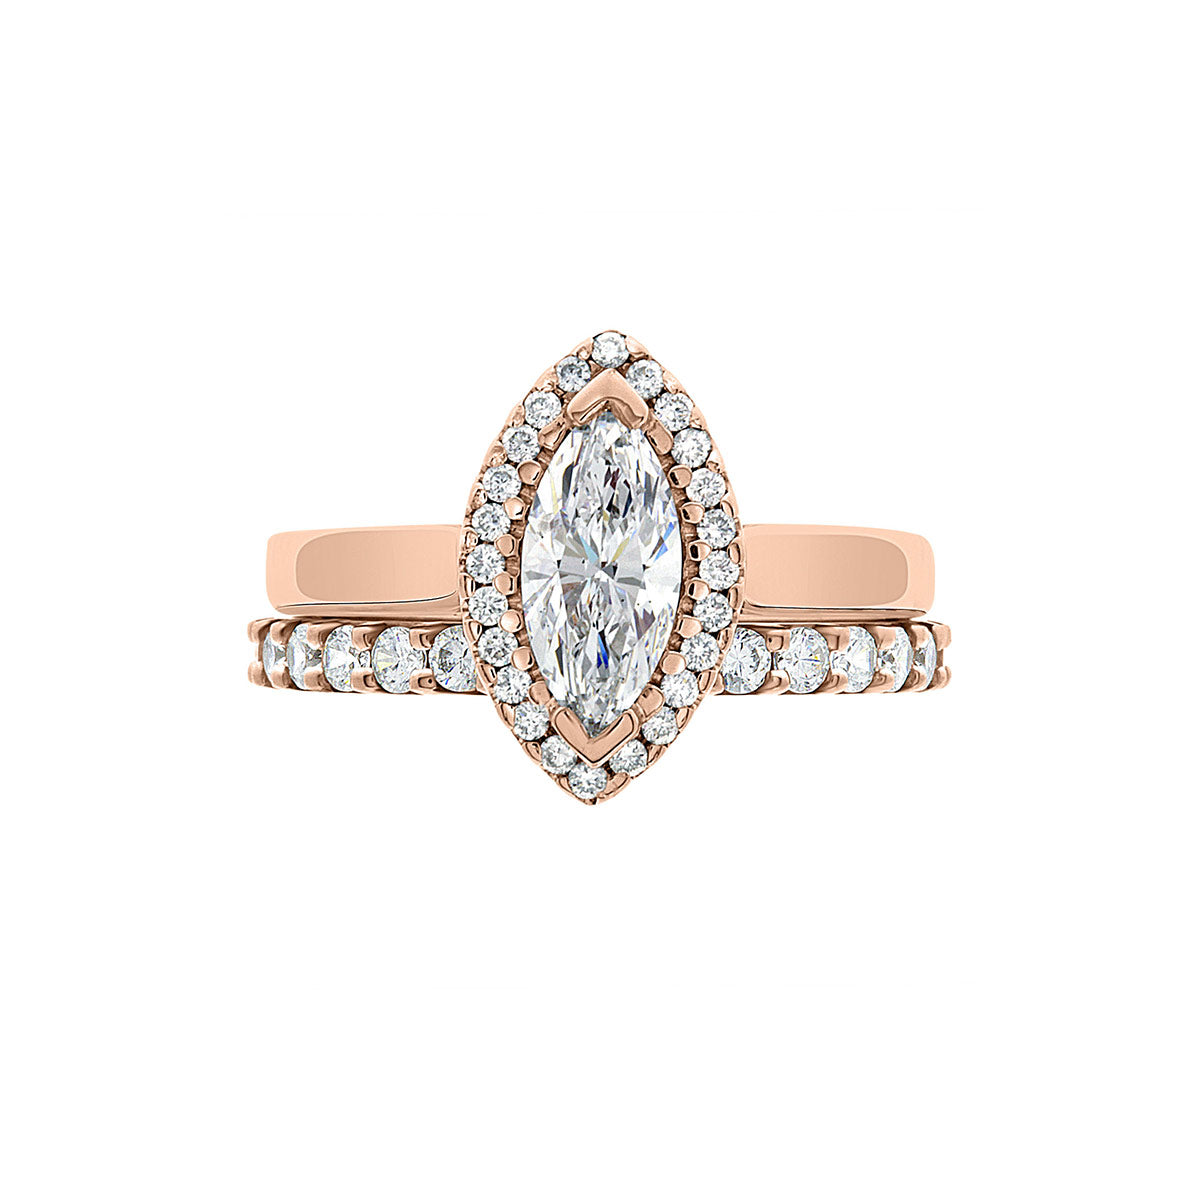 Marquise Cut Halo Ring in rose gold with a matching diamond set wedding band